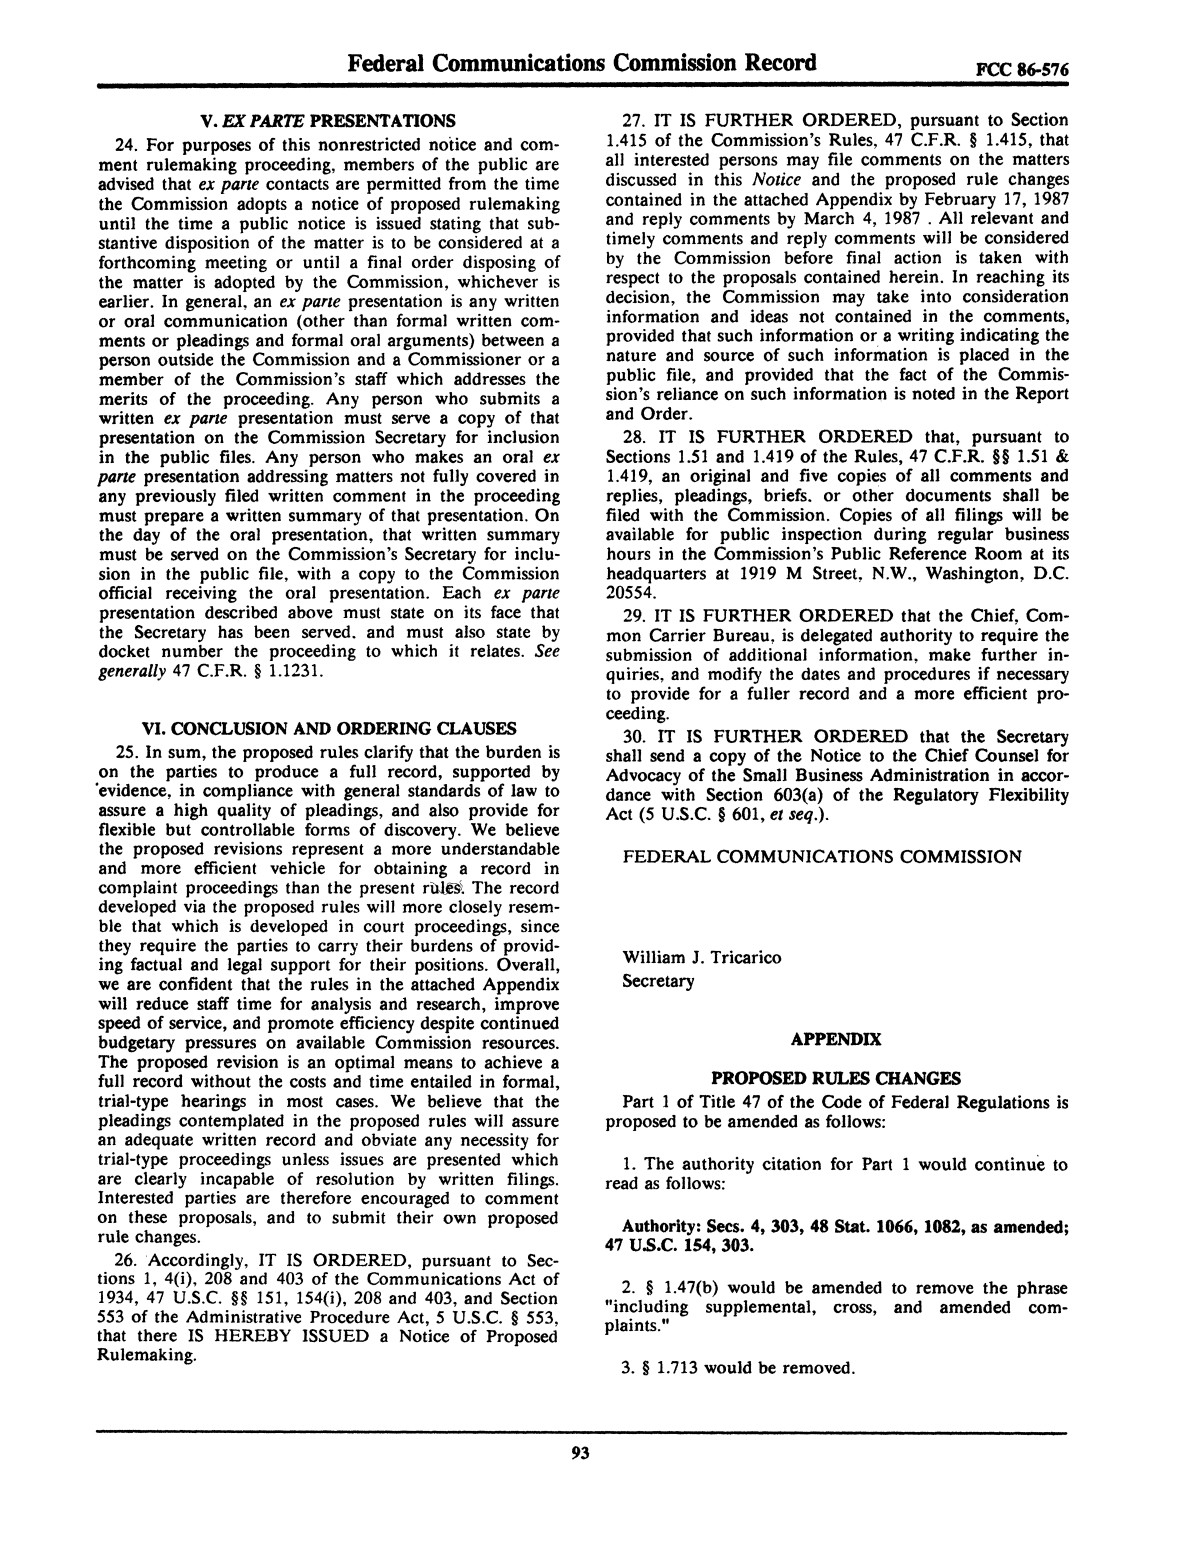 FCC Record, Volume 2, No. 1, Pages 1 to 409, January 5 - January 16, 1987
                                                
                                                    93
                                                